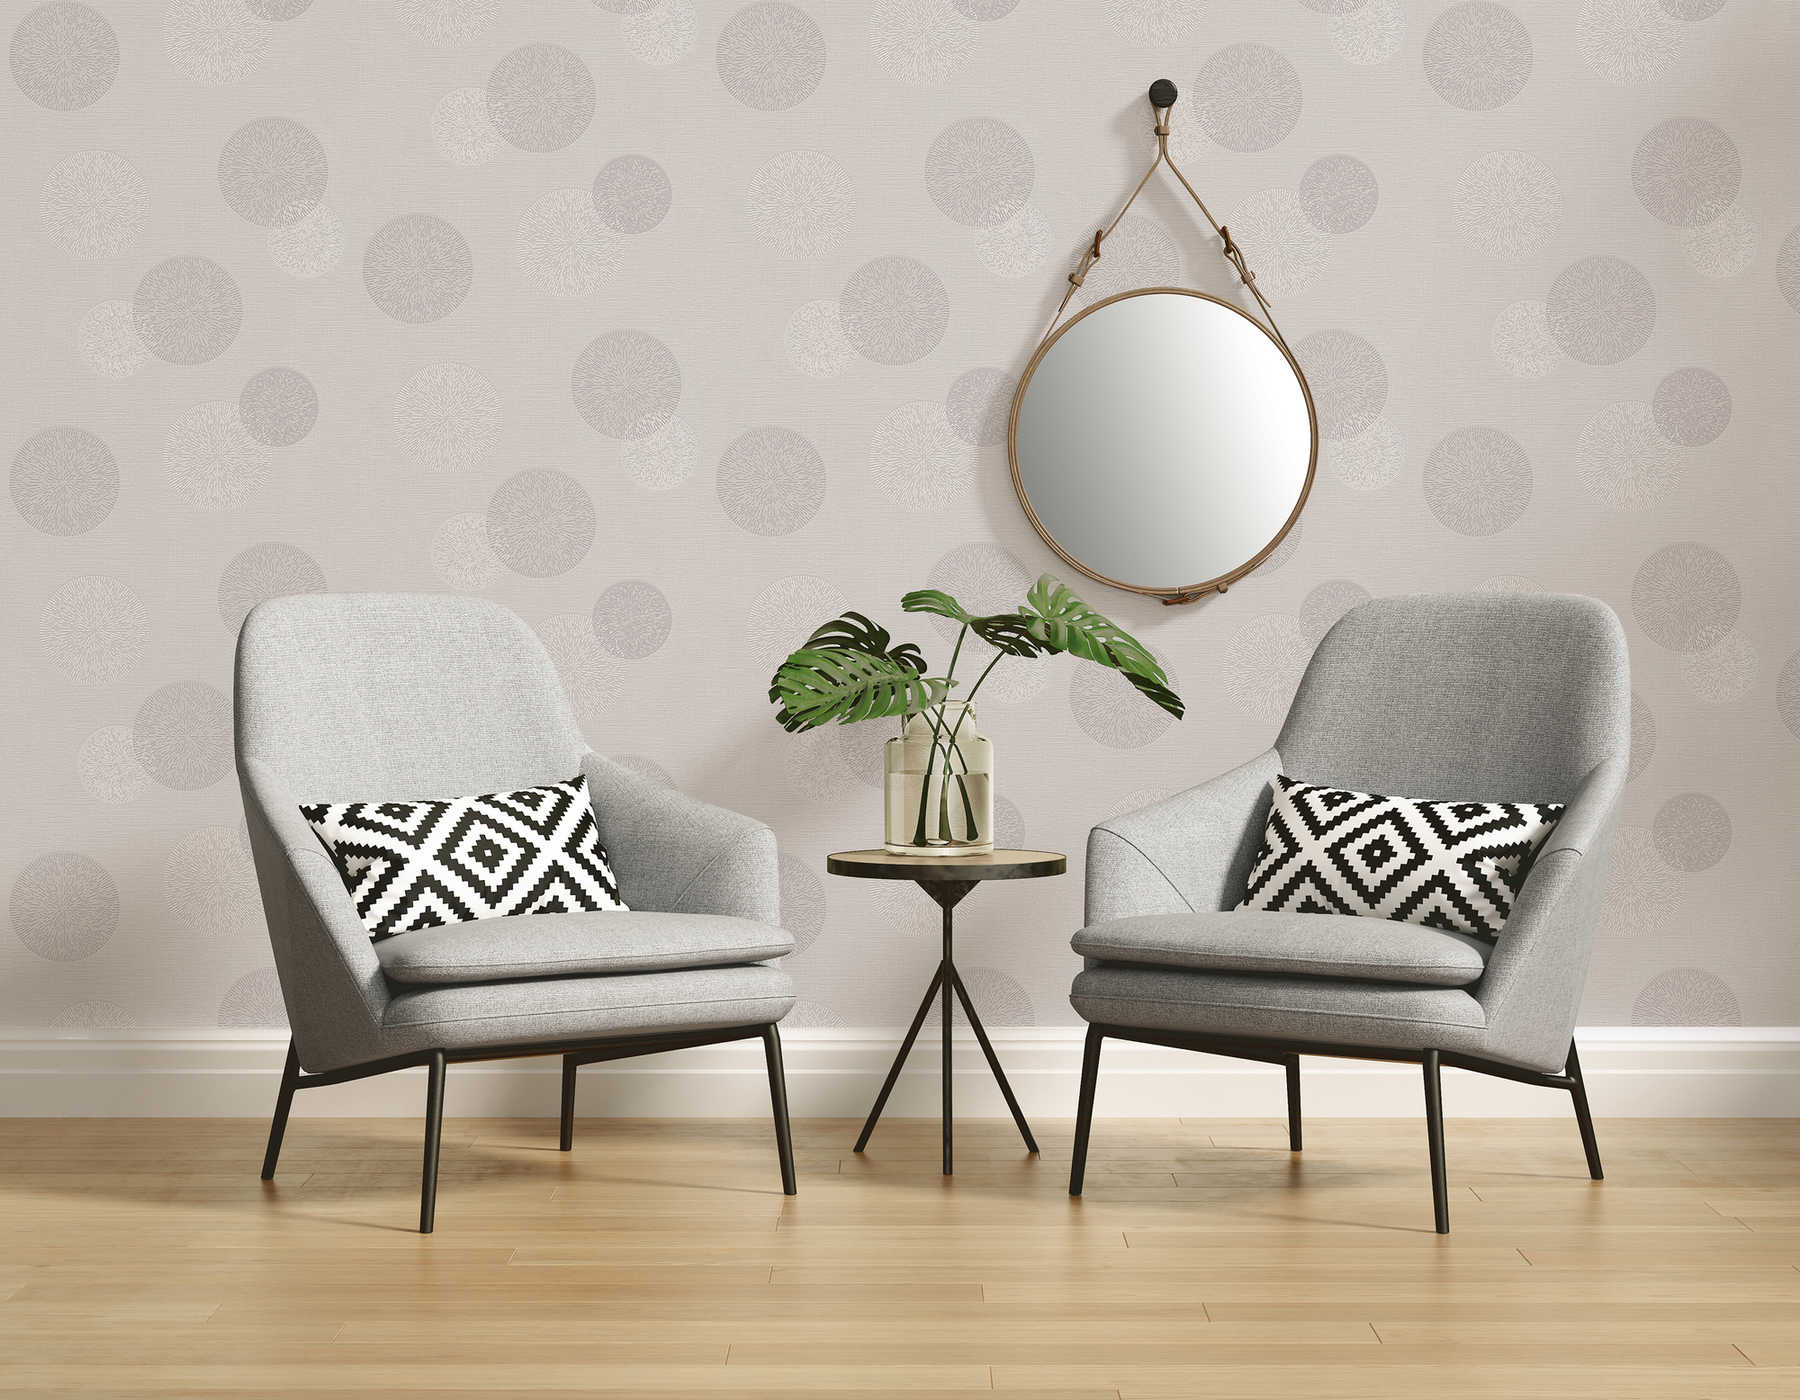             Textured wallpaper with retro pattern 50s vintage look - grey
        